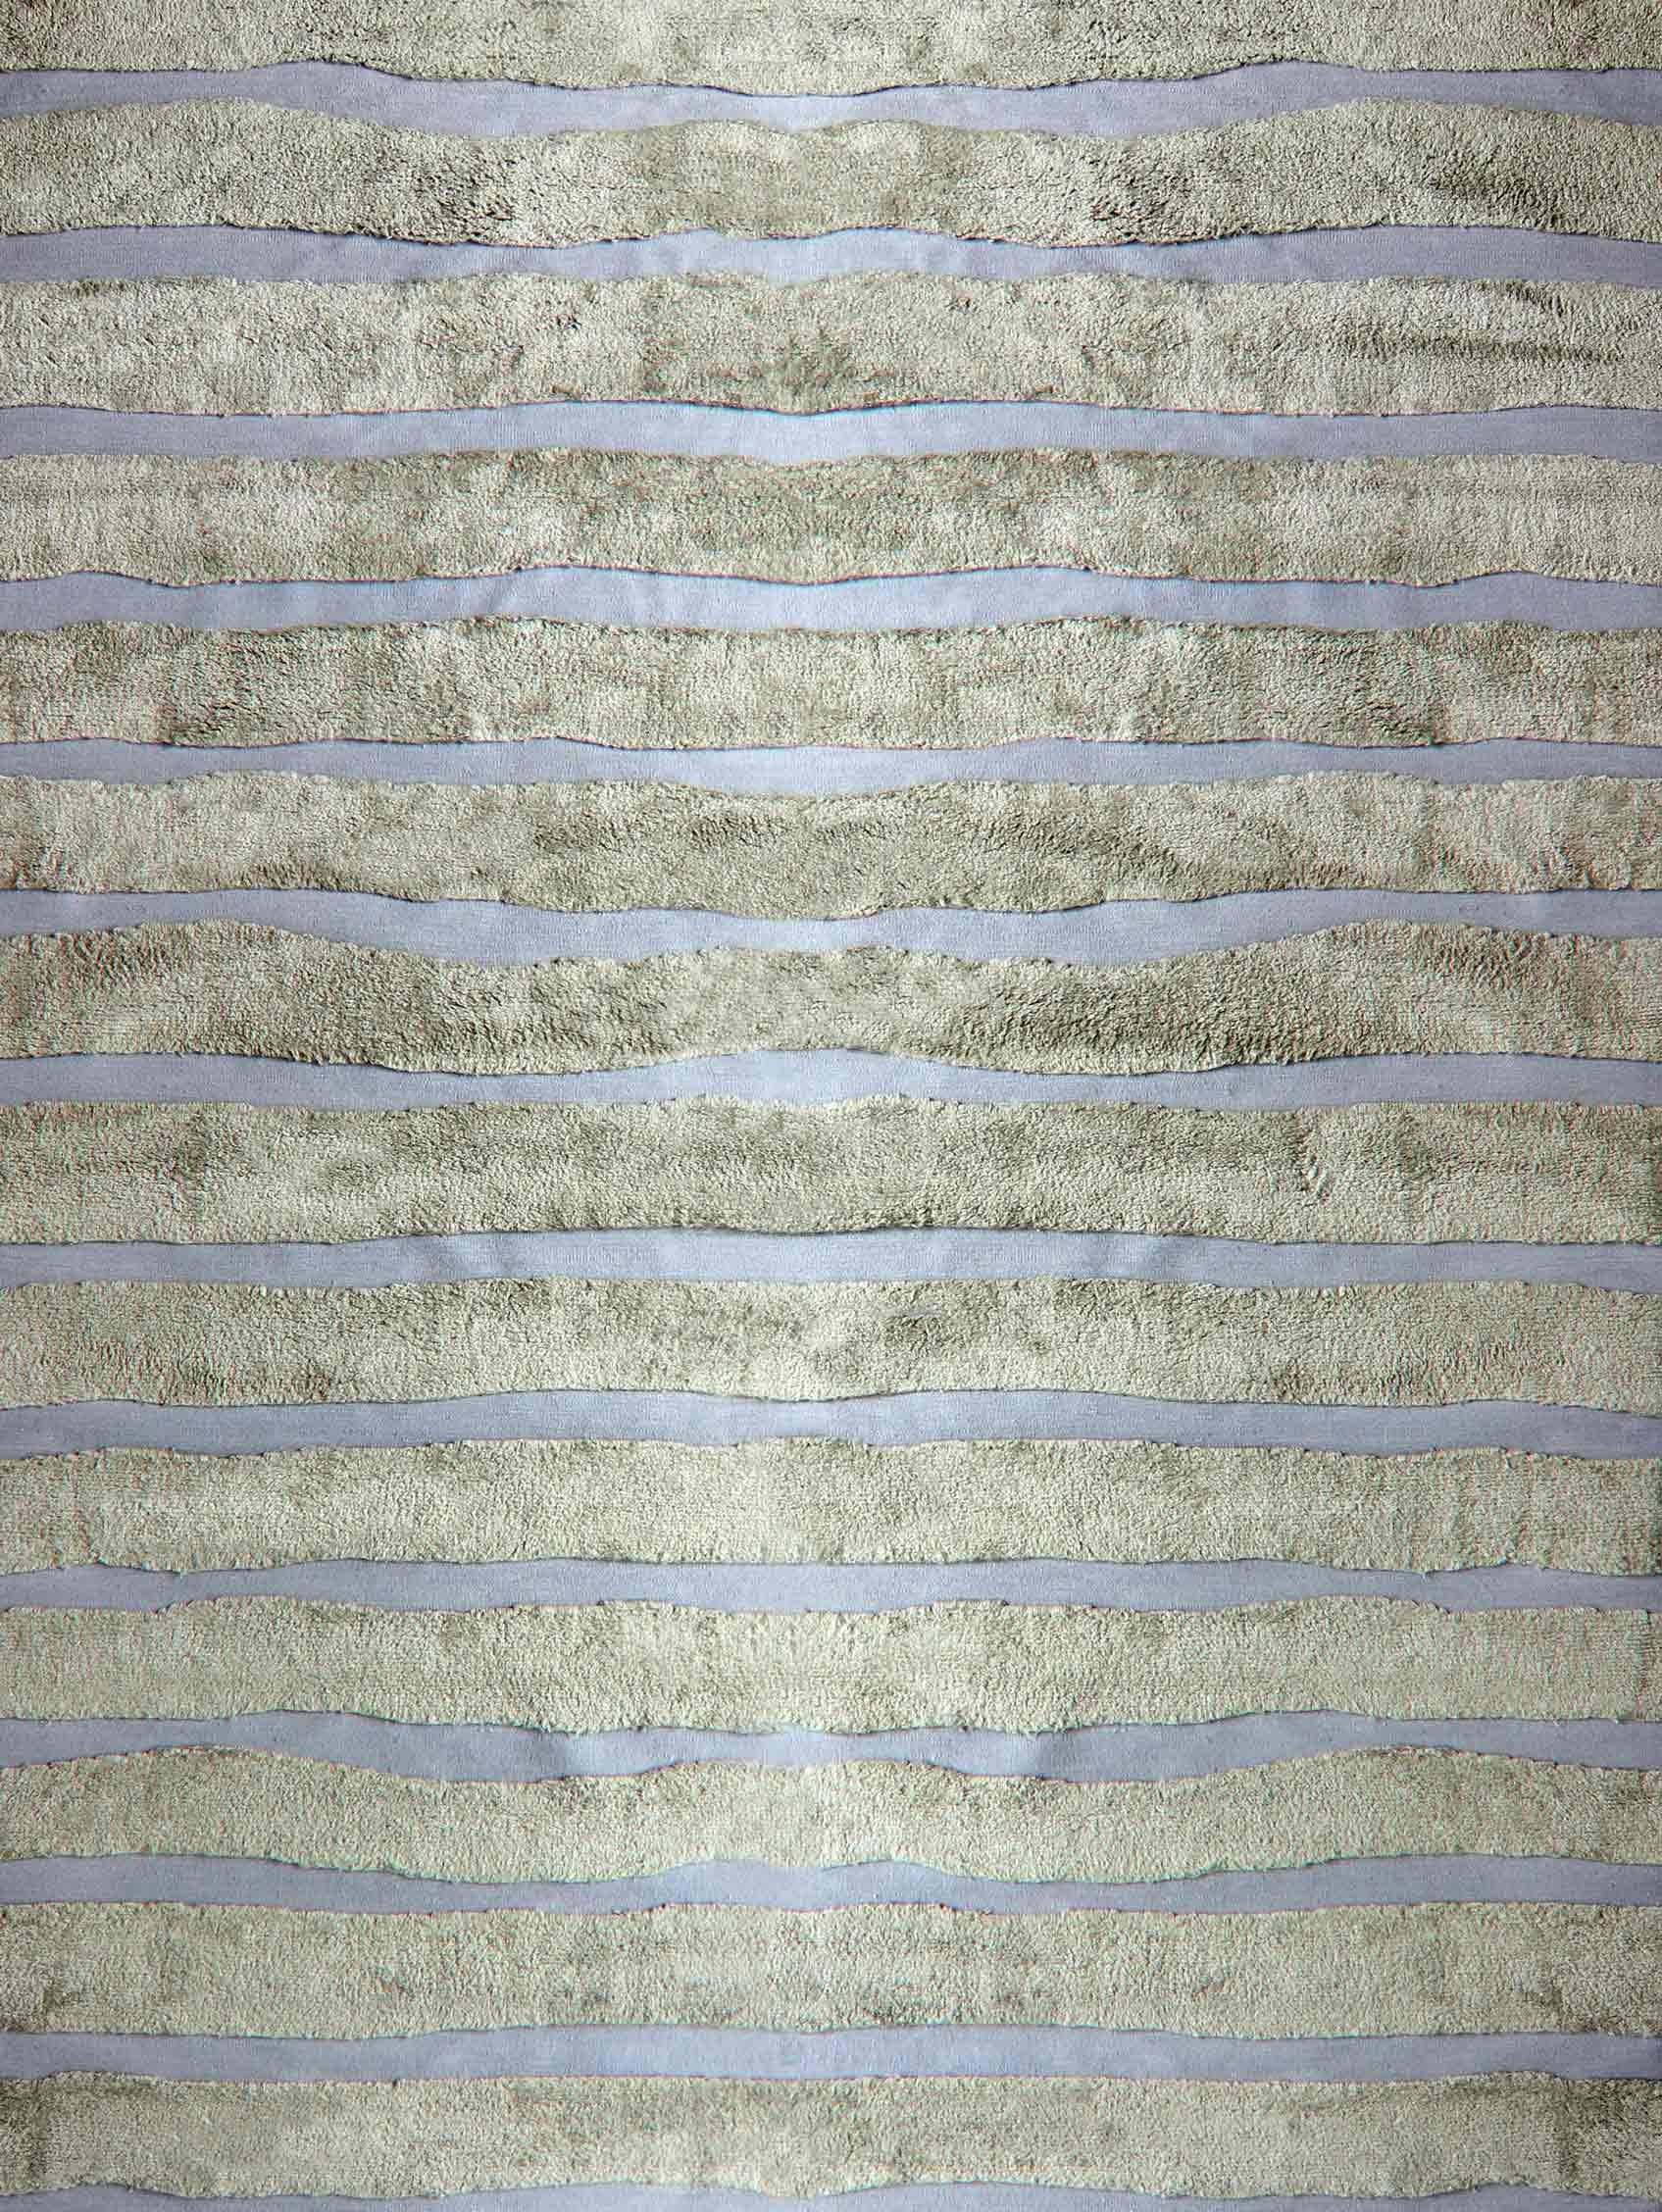 Bold stripe Gulf hand knotted rug by Eskayel
Dimensions: D 9' x H 12'
Pile Height: 10 mm
Materials: Merino wool, NZ wool.

Eskayel hand knotted rugs are woven to order and can be customized in various sizes, colors, materials, and weave